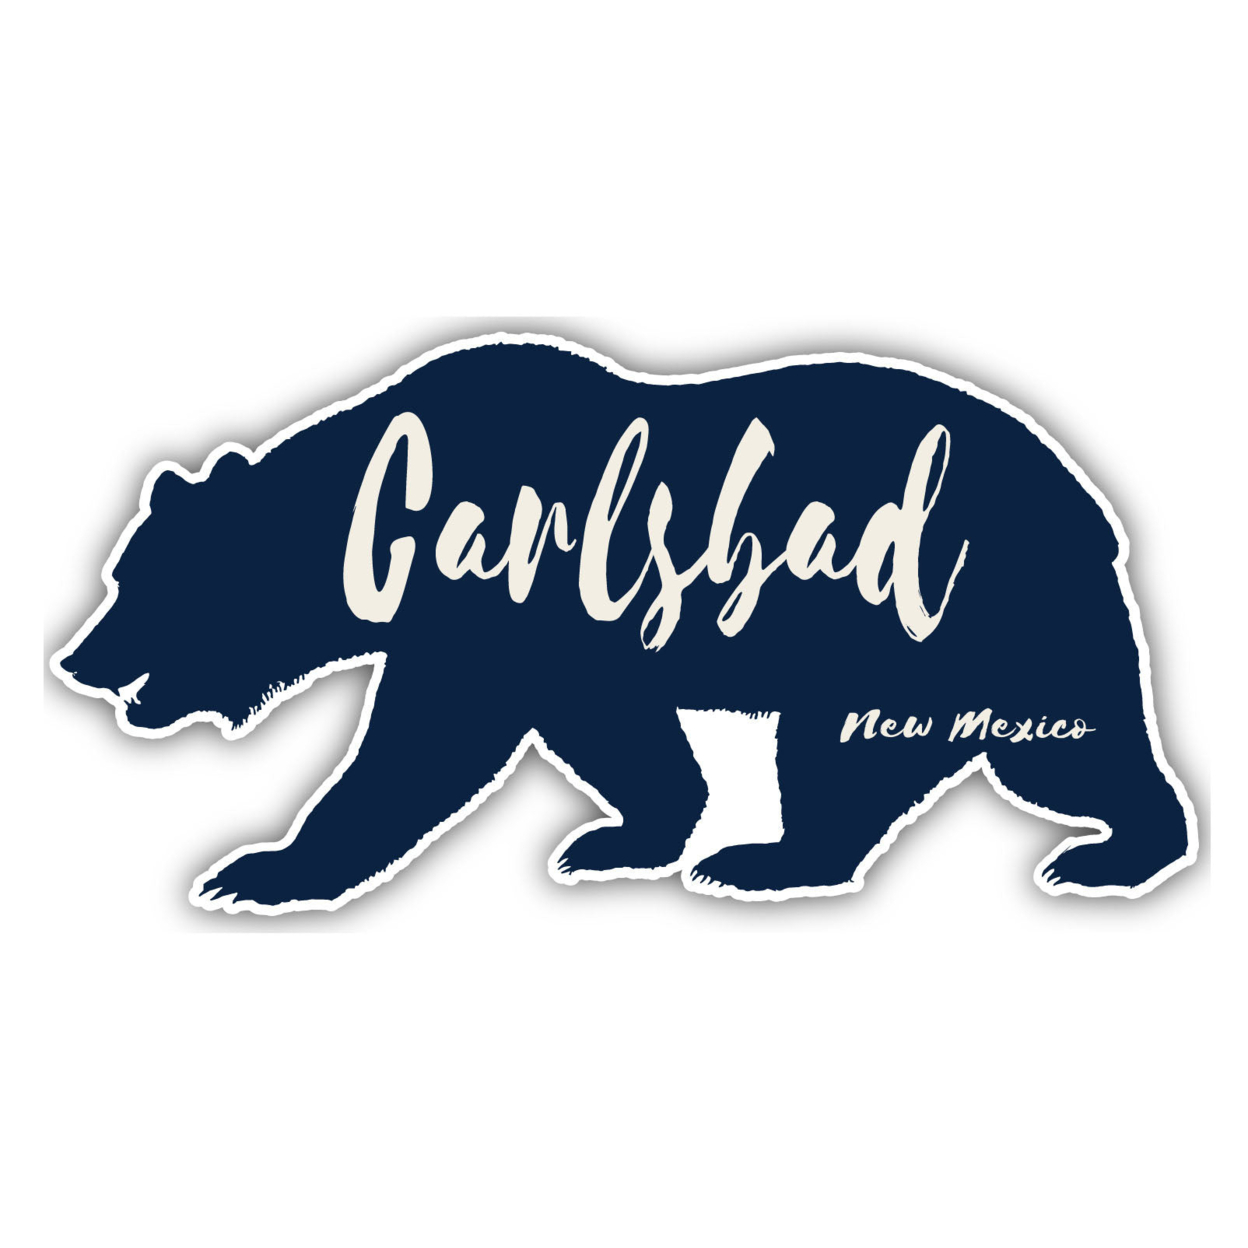 Carlsbad New Mexico Souvenir Decorative Stickers (Choose Theme And Size) - Single Unit, 12-Inch, Bear